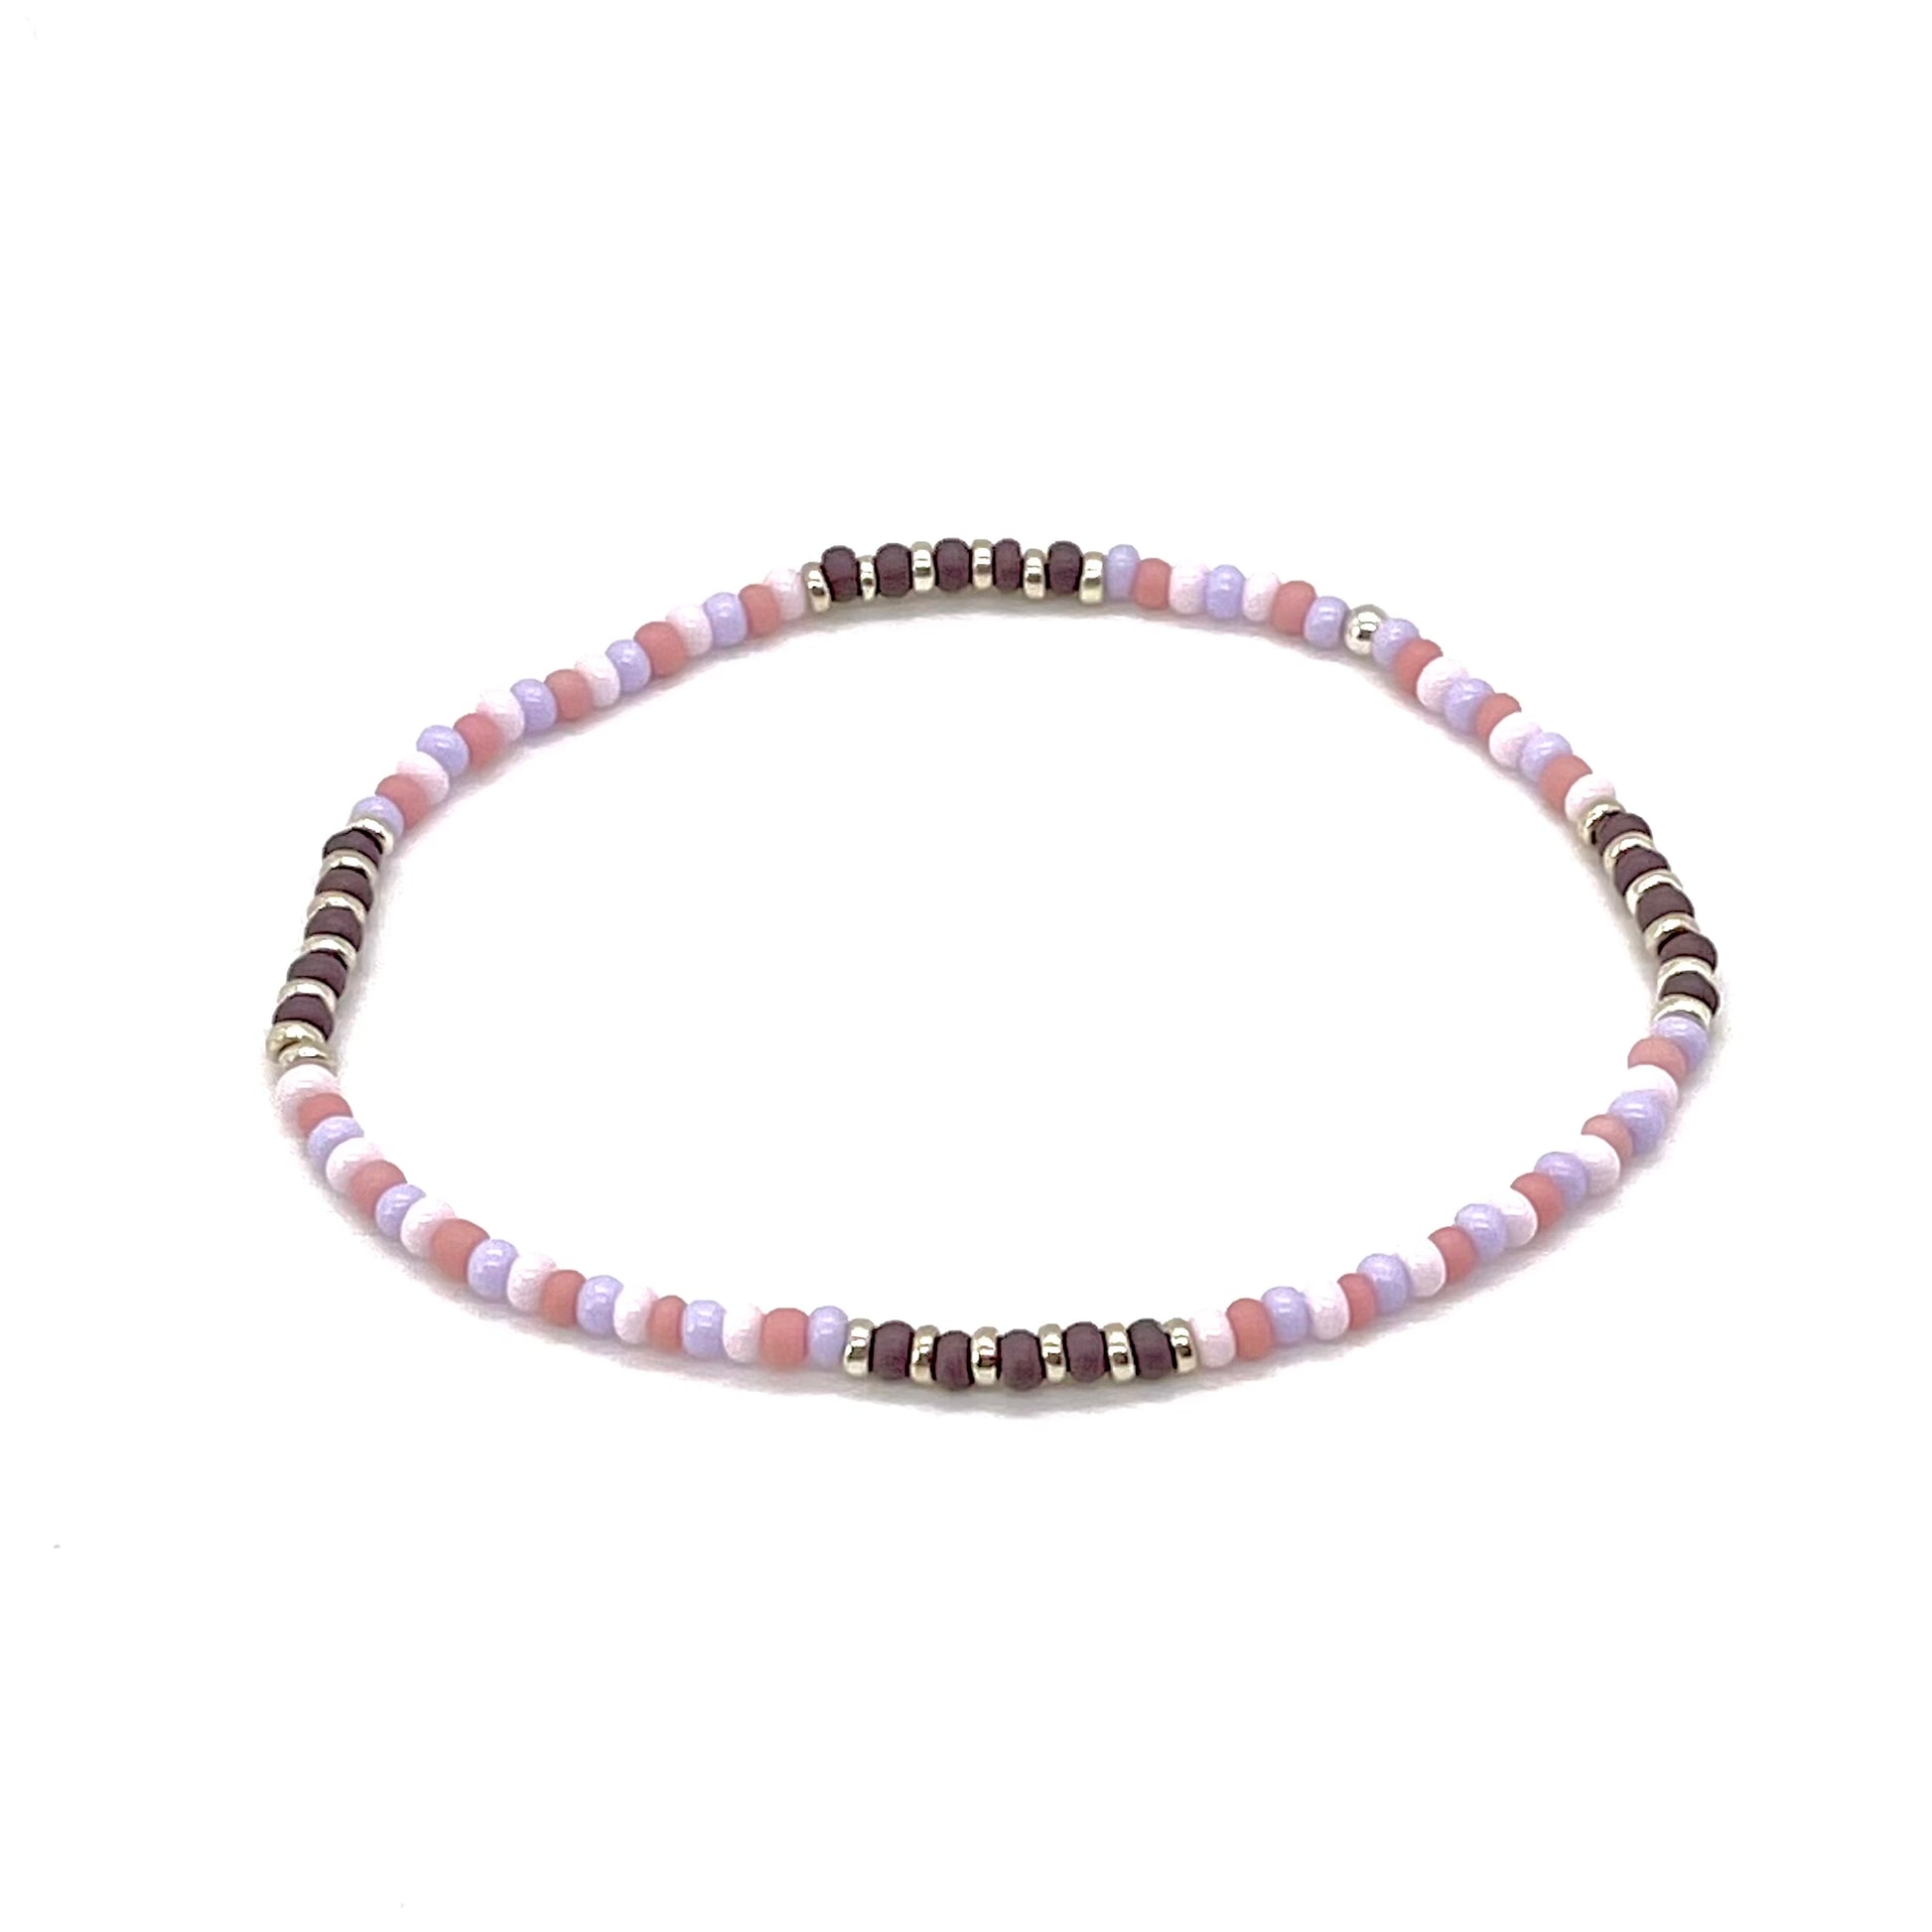 Beach anklet with pink and purple seed beads. Cute waterproof stretch anklet handmade in NYC.